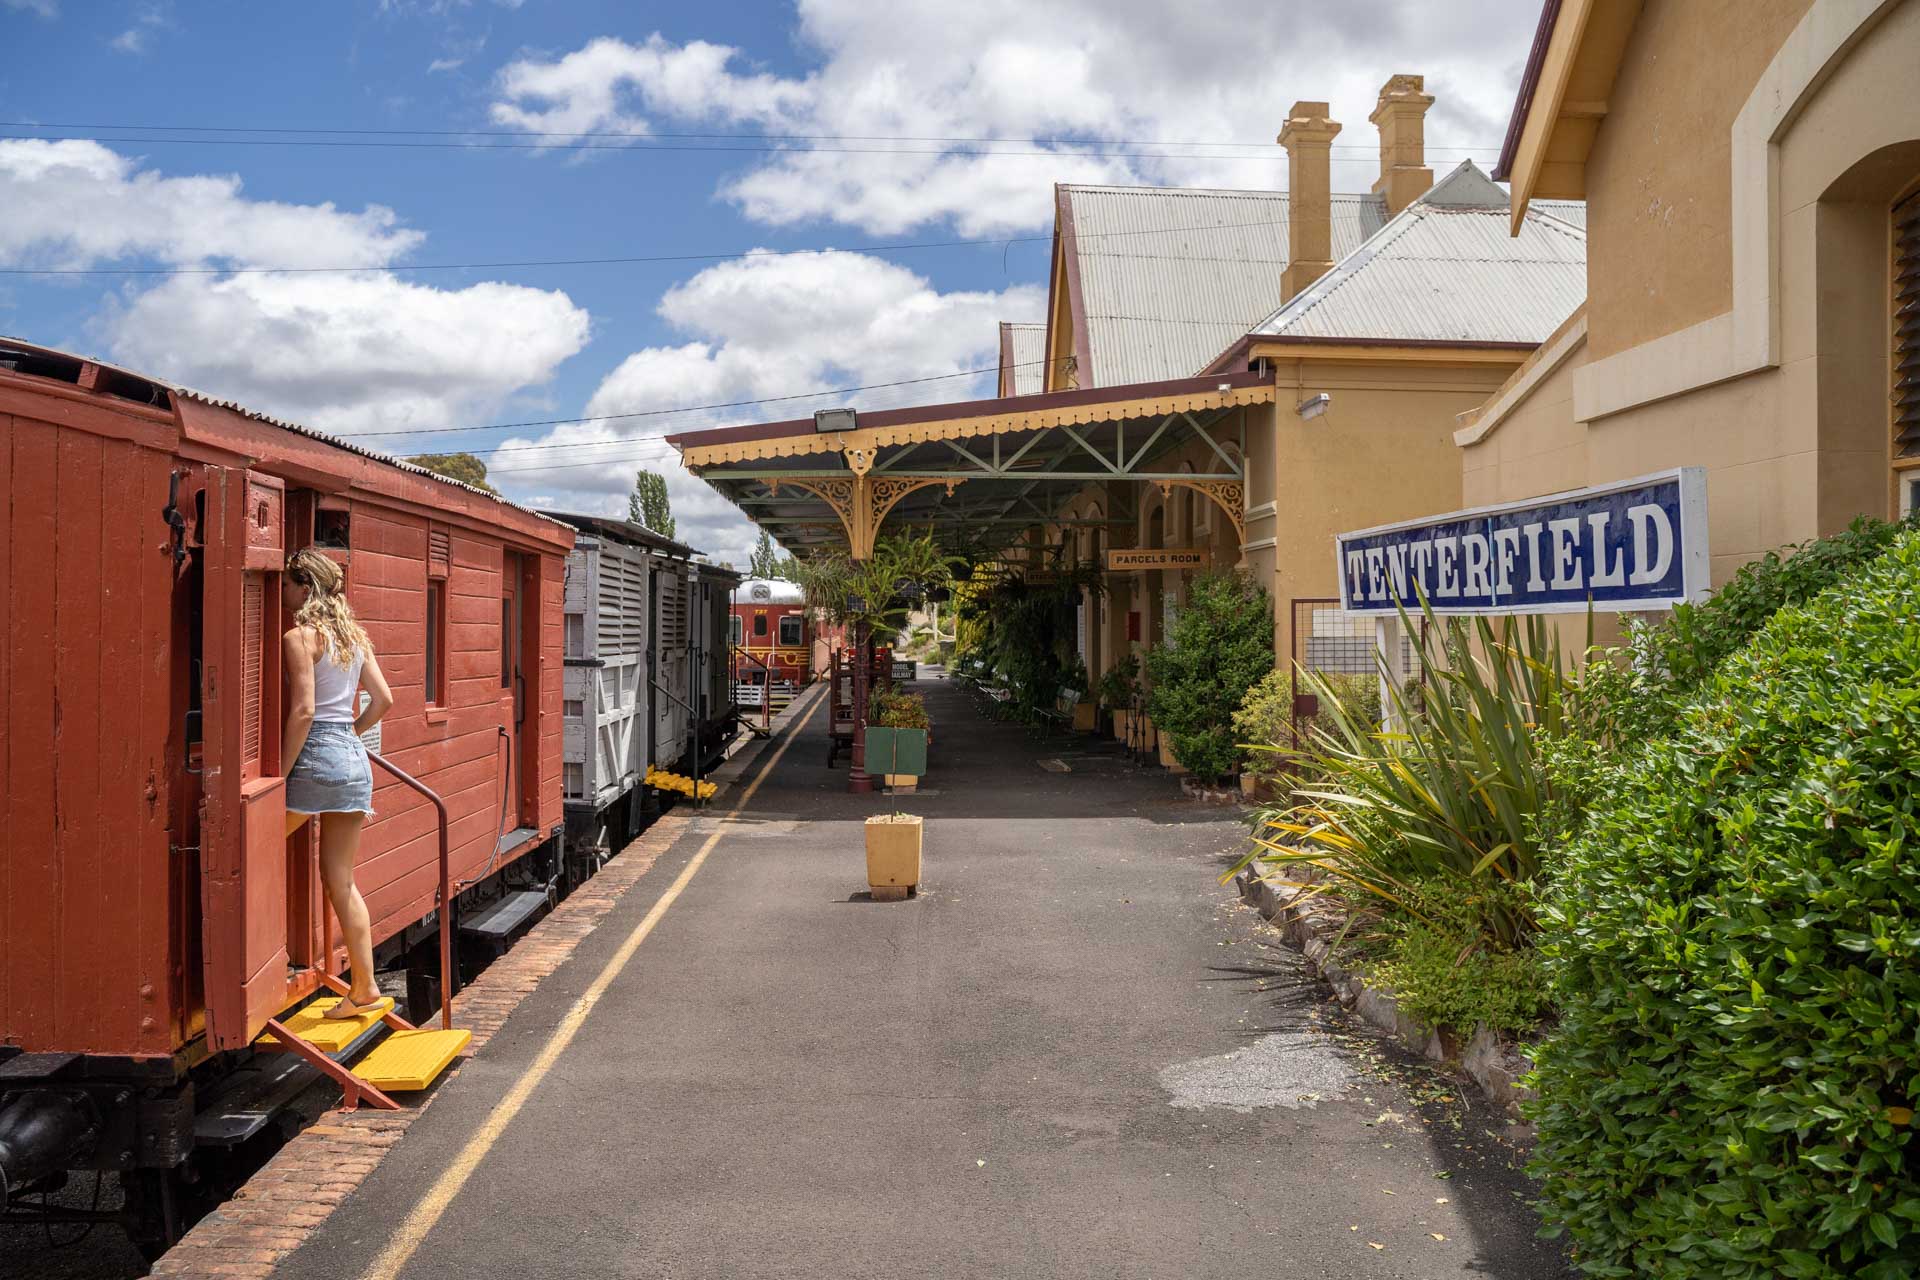 A Weekend in Tenterfield: Where to Stay, Adventure, and Eat, constance allan, railway museum, train station